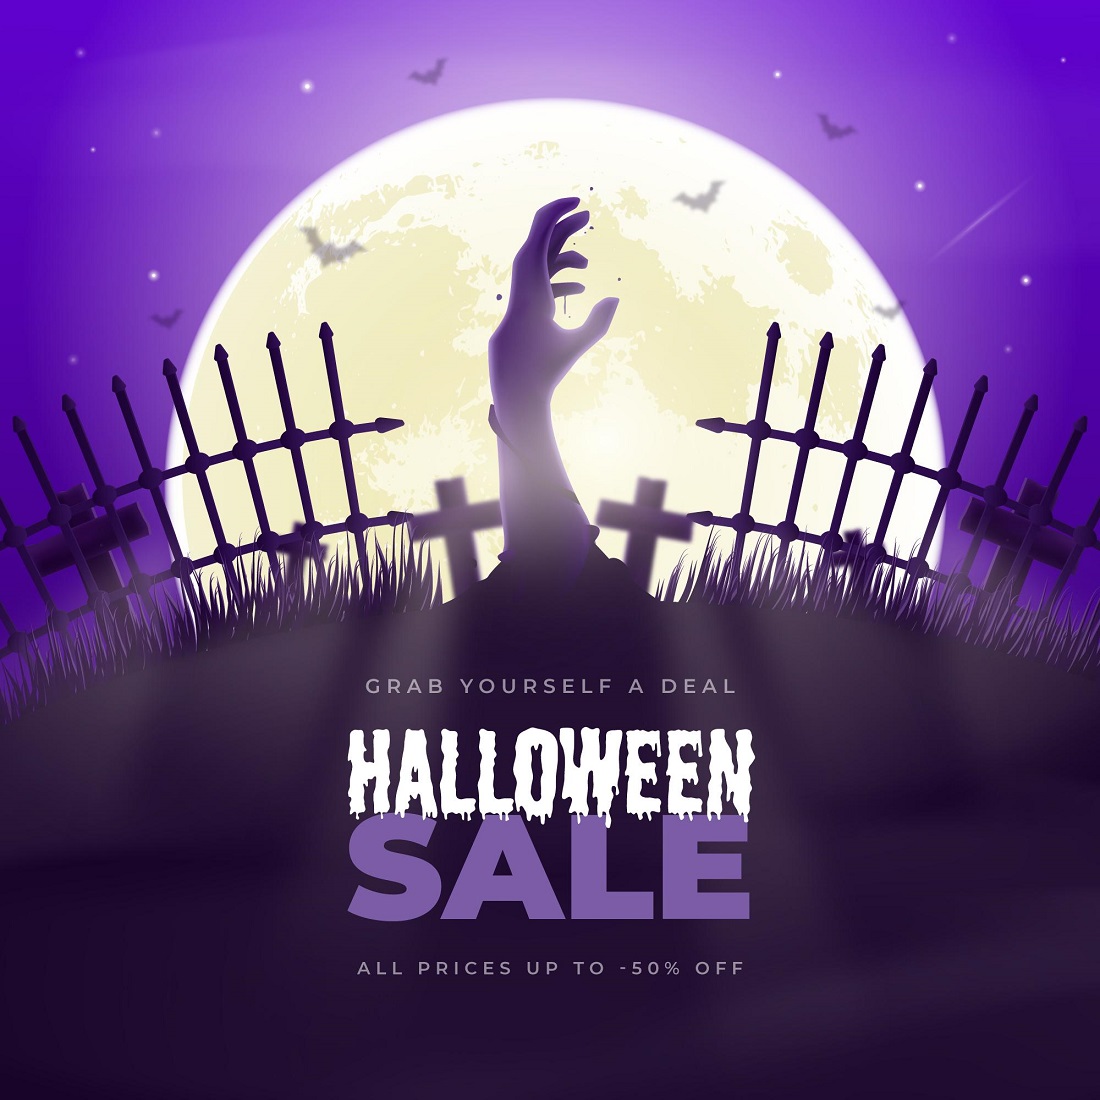 Realistic Halloween sale illustration with cemetery preview image.